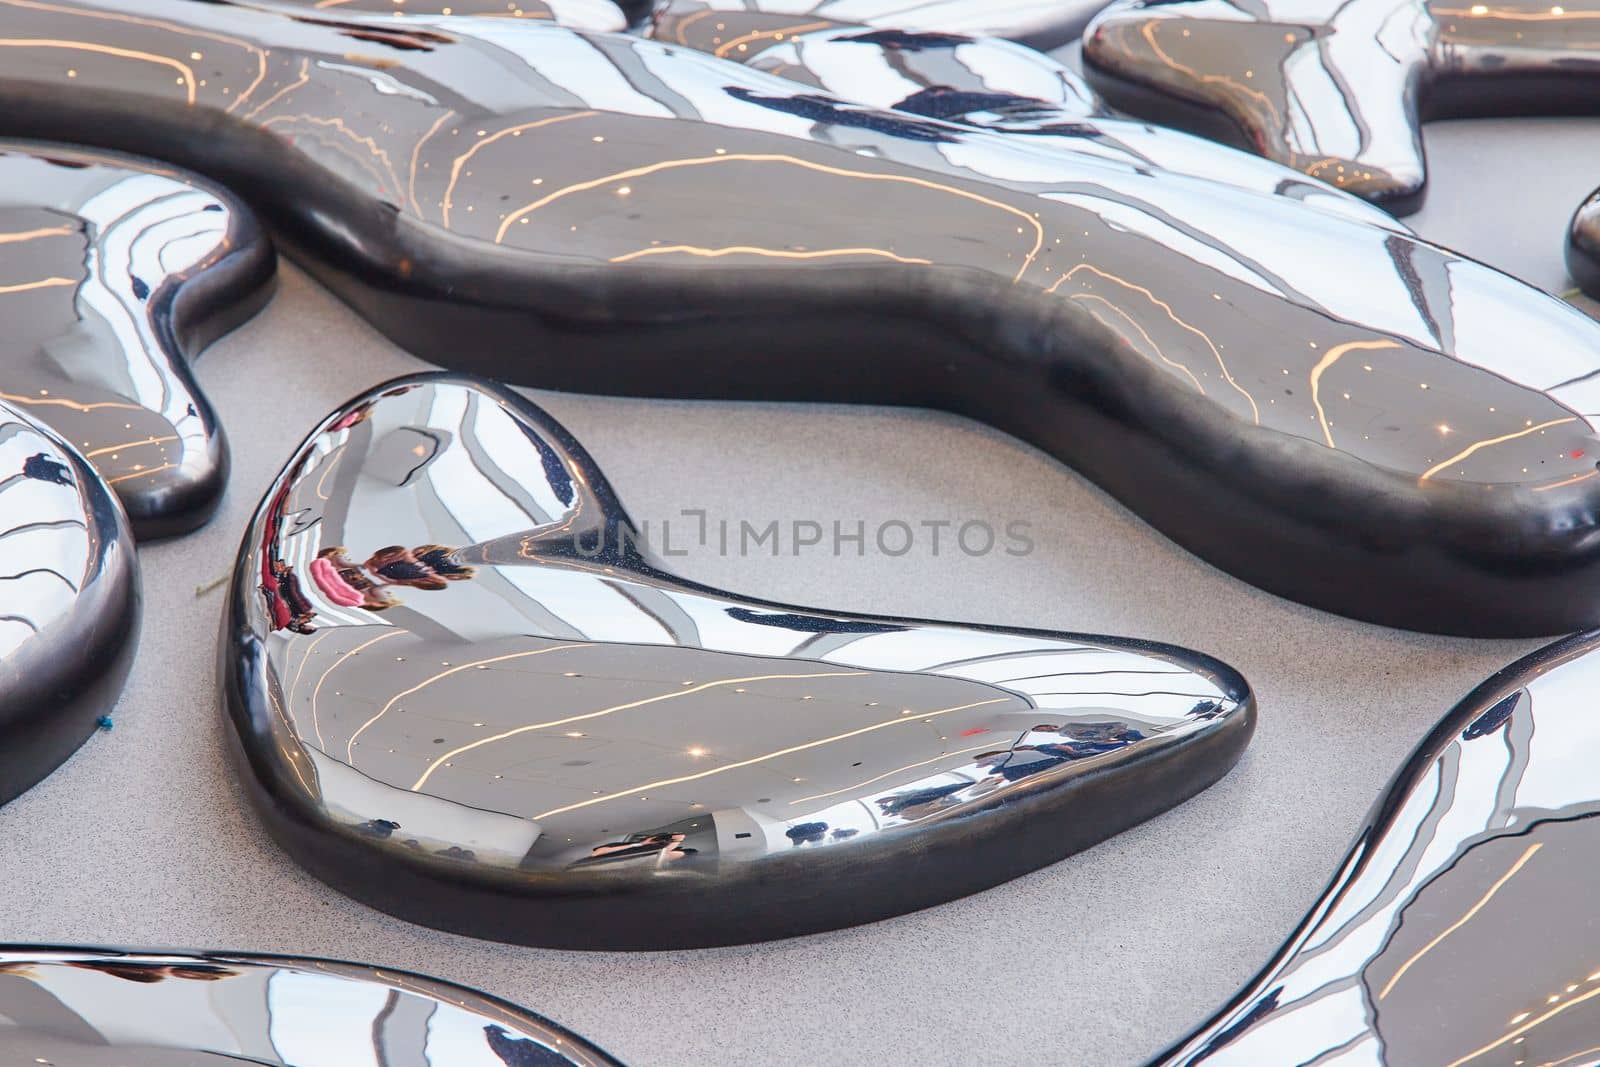 Image of Ground detail of art exhibit melting reflecting shiny metal mirror pieces